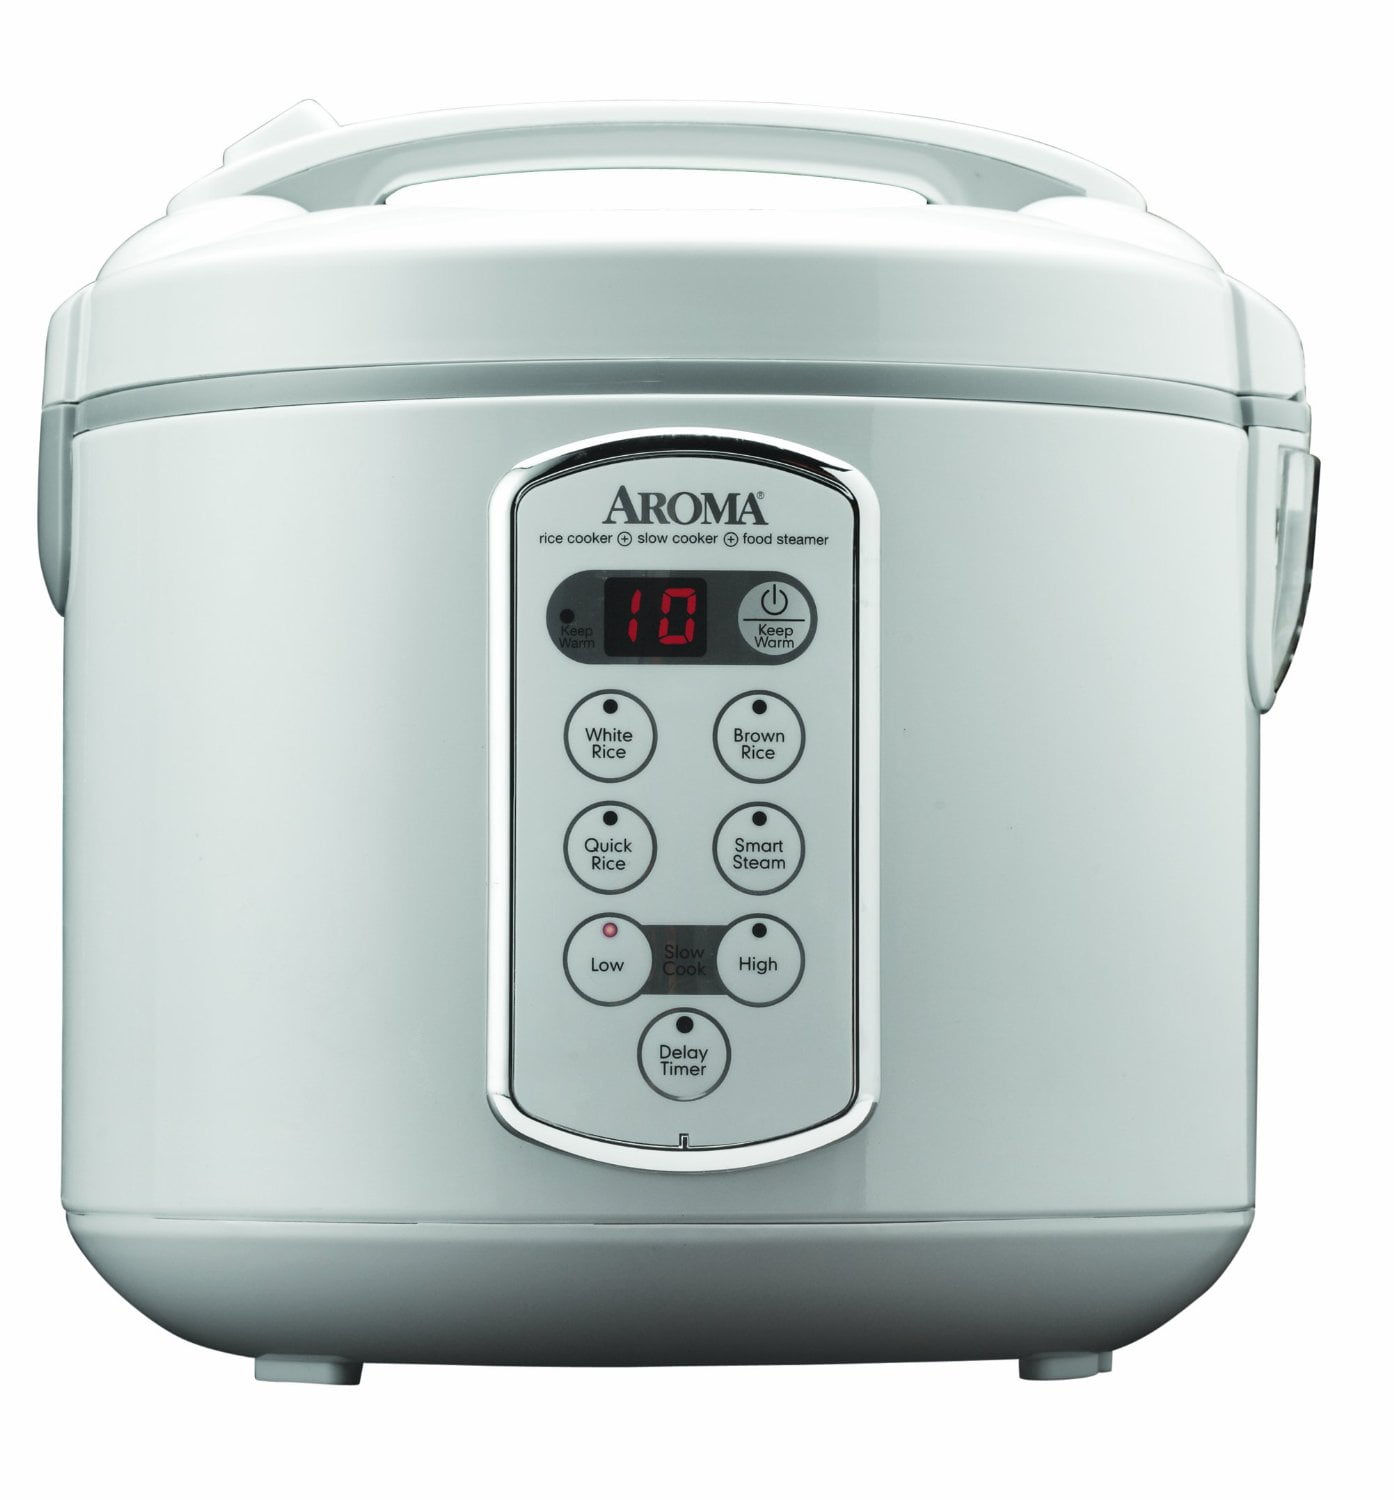 Aroma Arc A Digital Rice Cooker Food Steamer Slow Cooker White